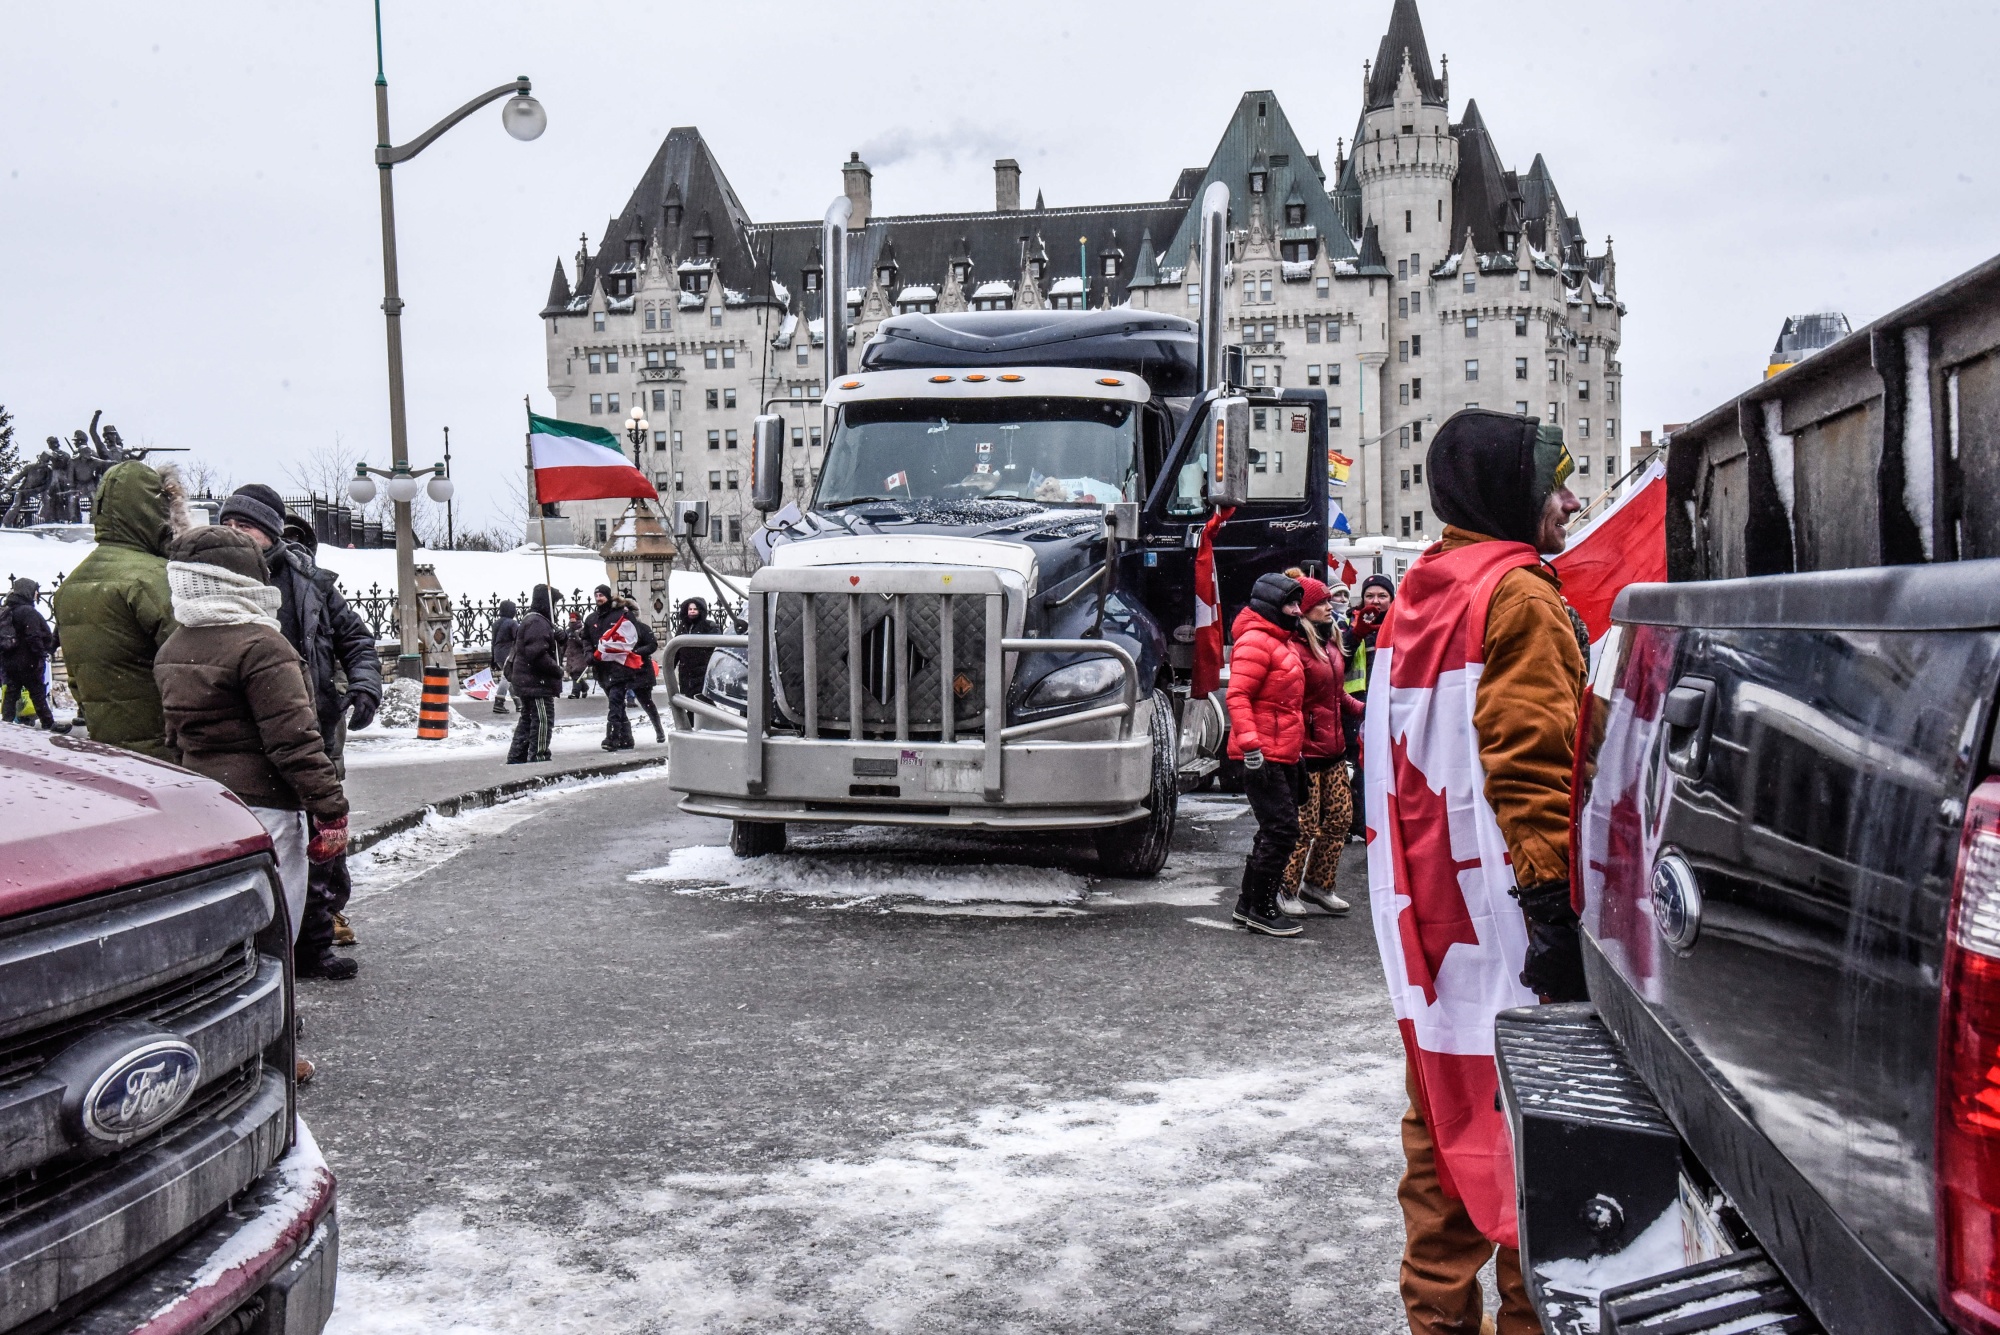 Protesters denounce Covid restrictions near the parliament buildings in Ontario on Feb. 12.